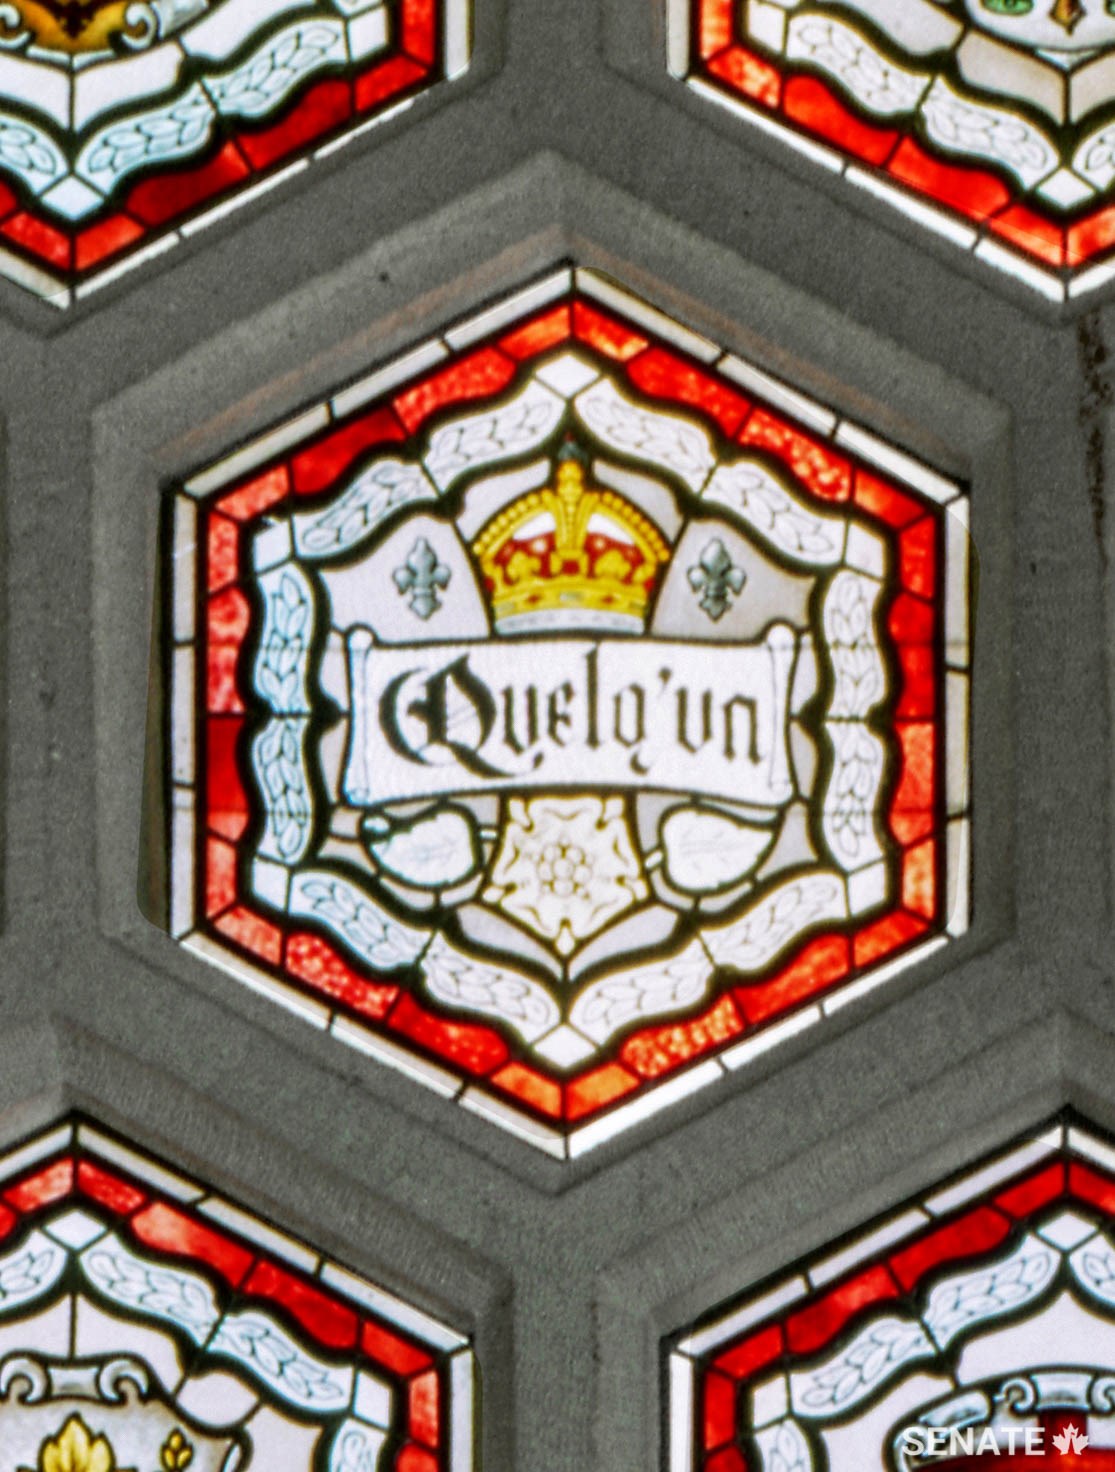 The foyer’s stained-glass ceiling incorporates the names of all the speakers of the Senate until 1920. A single pane with a cryptic message represents Senate speakers to come. It is not clear whether the misspelling (it should be <em>quelqu’un</em>) is intentional.